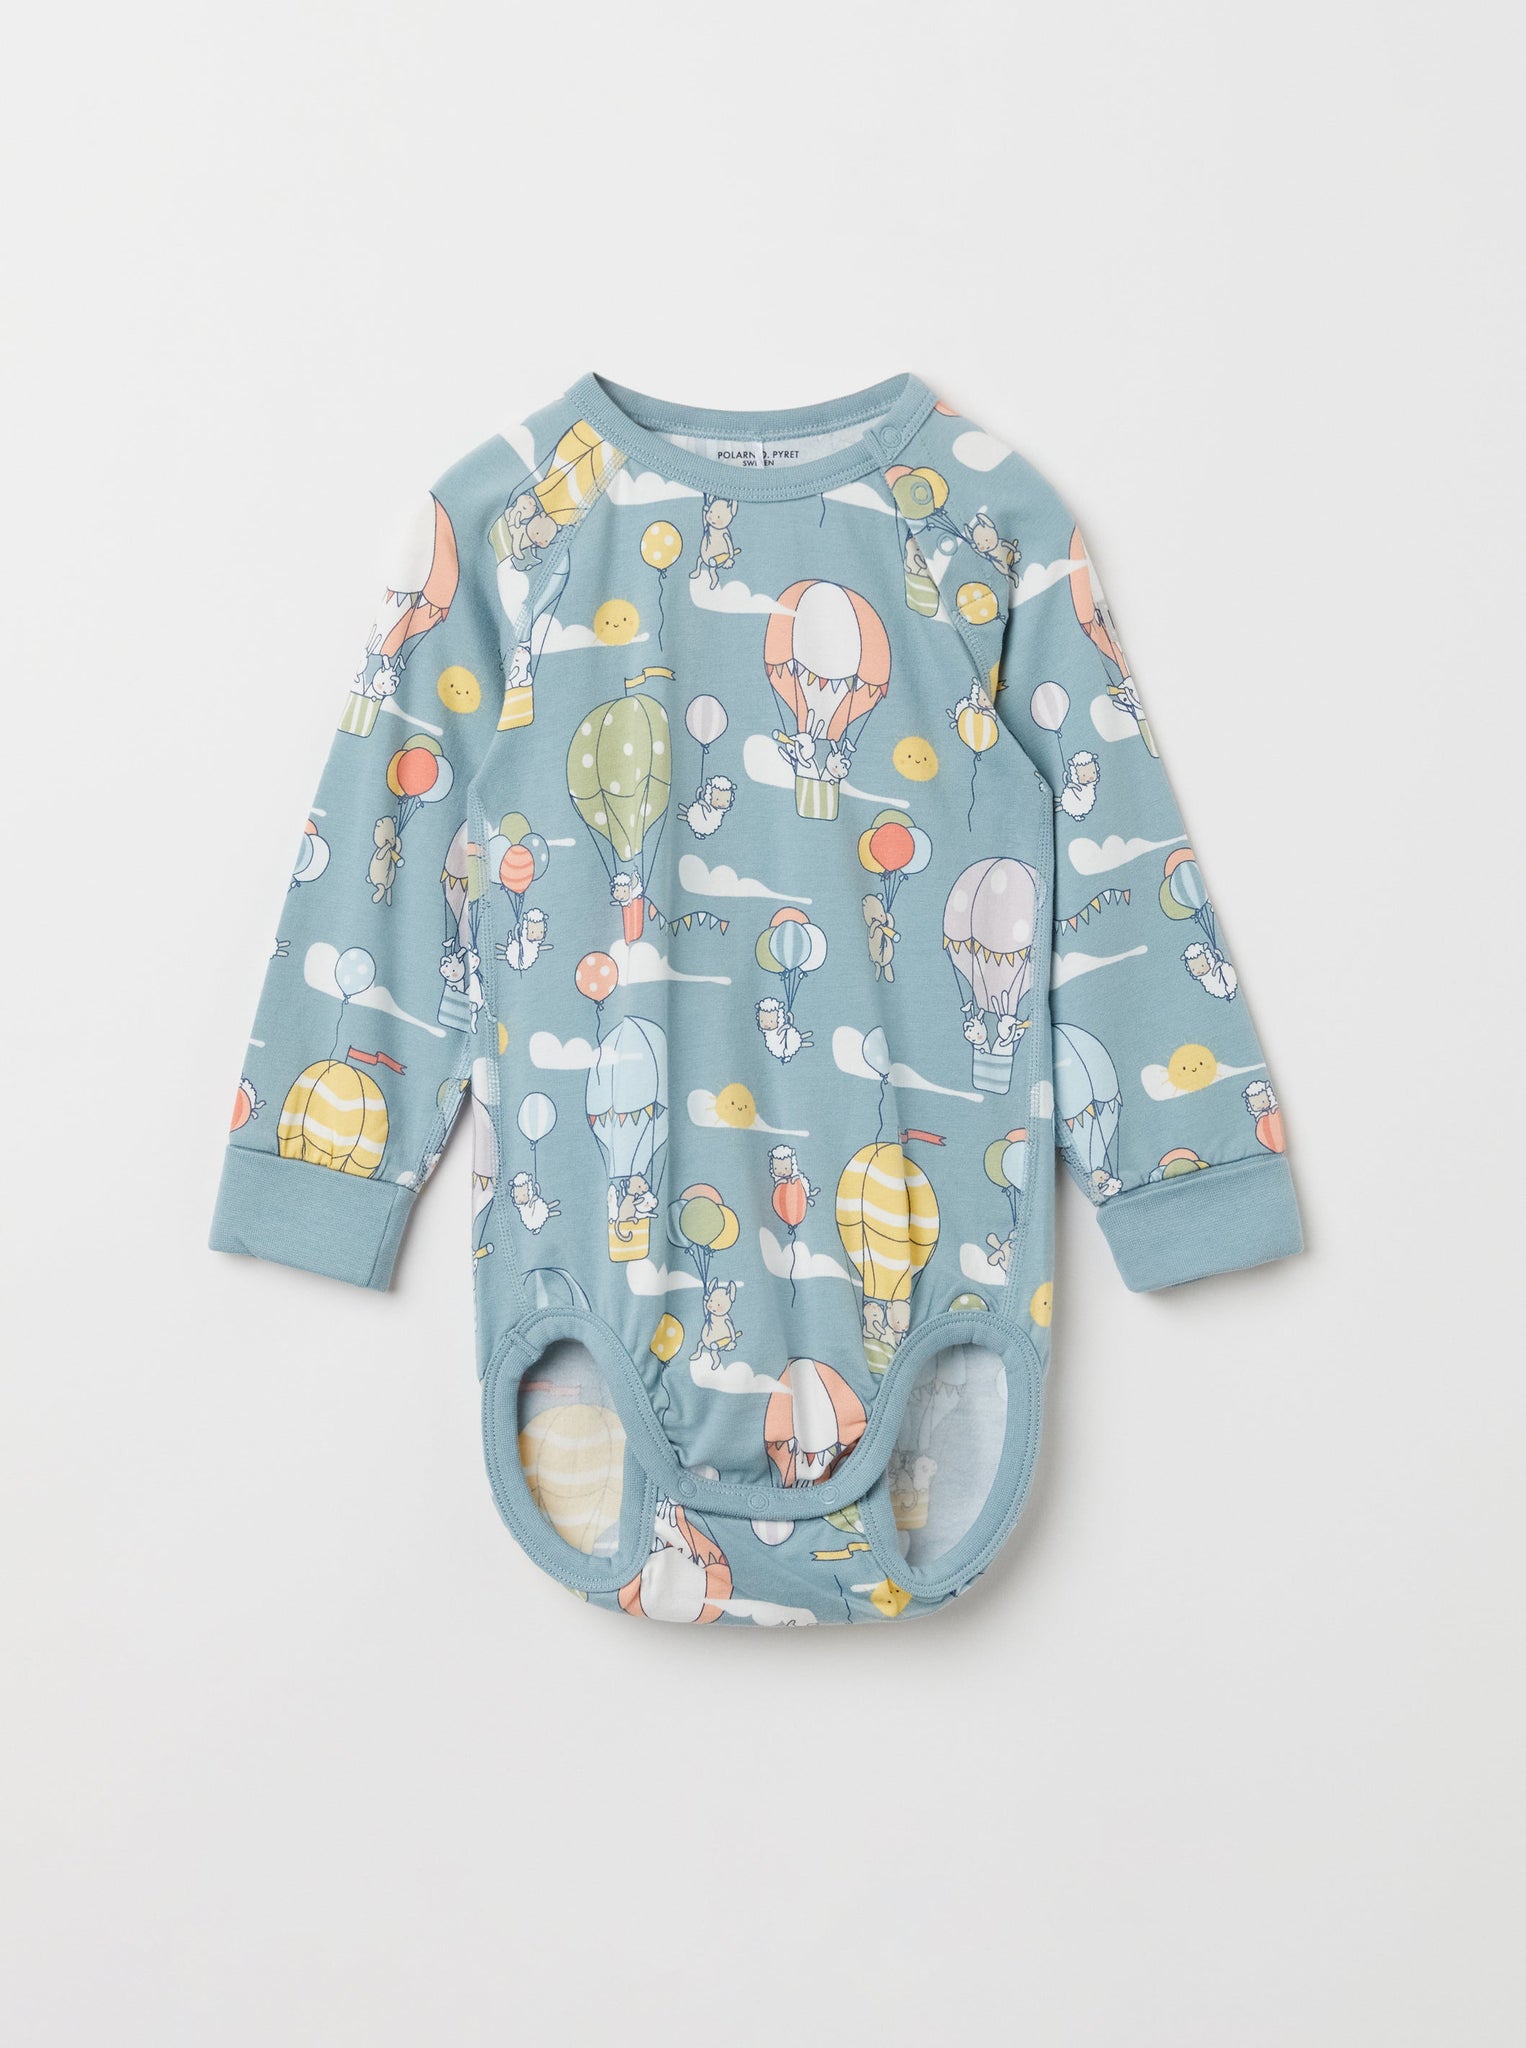 Balloon Organic Cotton Blue Babygrow from the Polarn O. Pyret babywear collection. Clothes made using sustainably sourced materials.